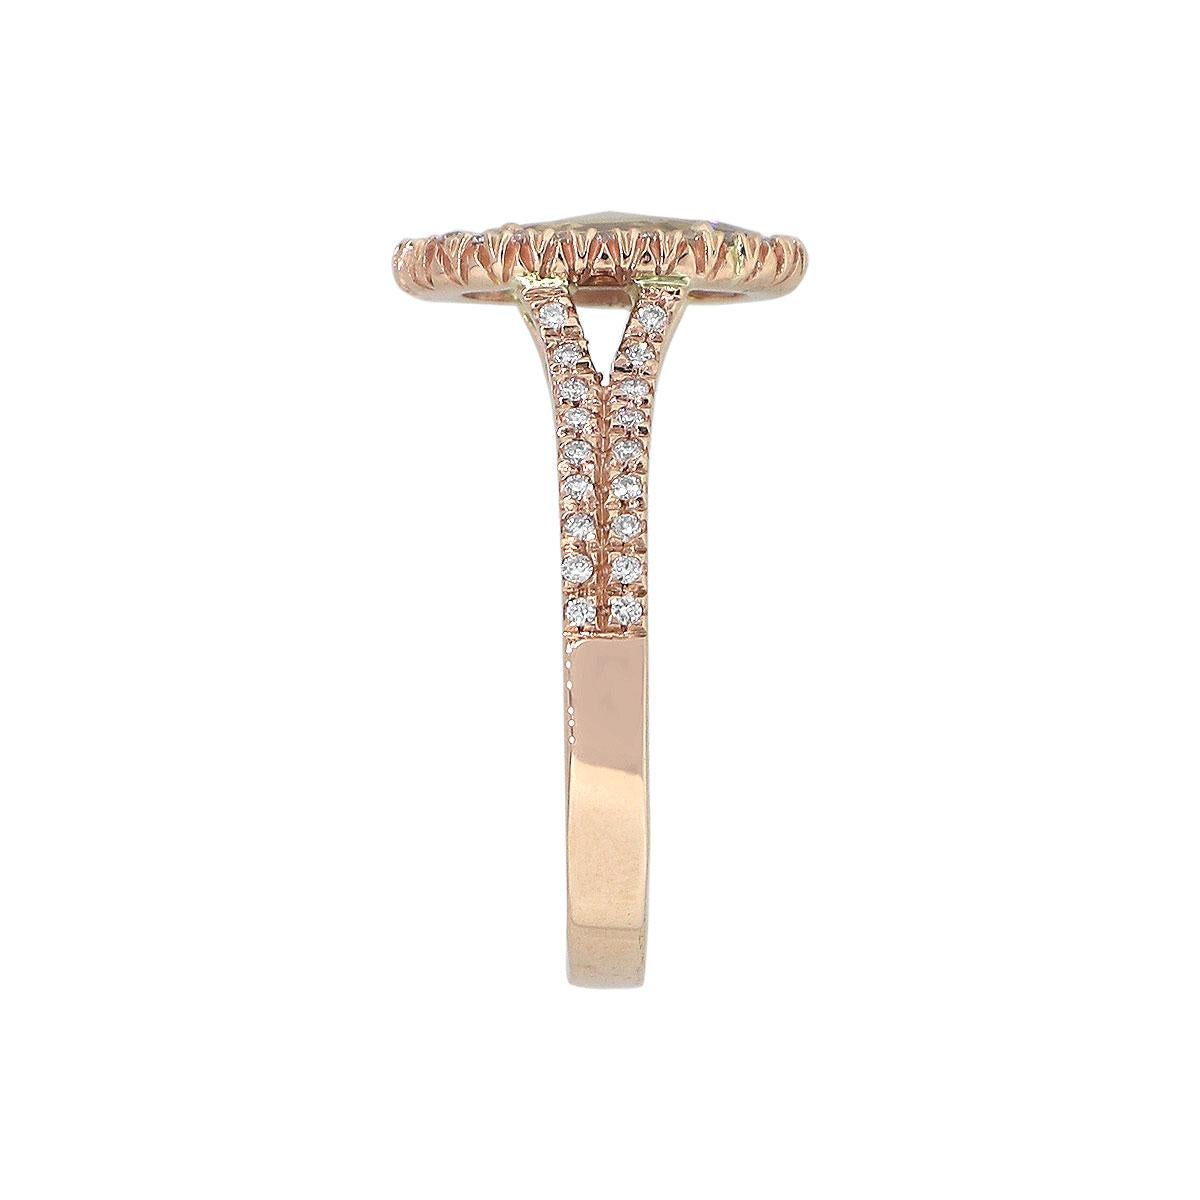 Material: 14k Rose Gold
Center Diamond Details: Approx. 0.85ct Oval Cut Diamond. Diamond is Fancy Light Brown in color and SI in clarity
Adjacent Diamond Details: Approx. 0.50ctw of round cut diamonds. Diamonds are G/H in color and VS in